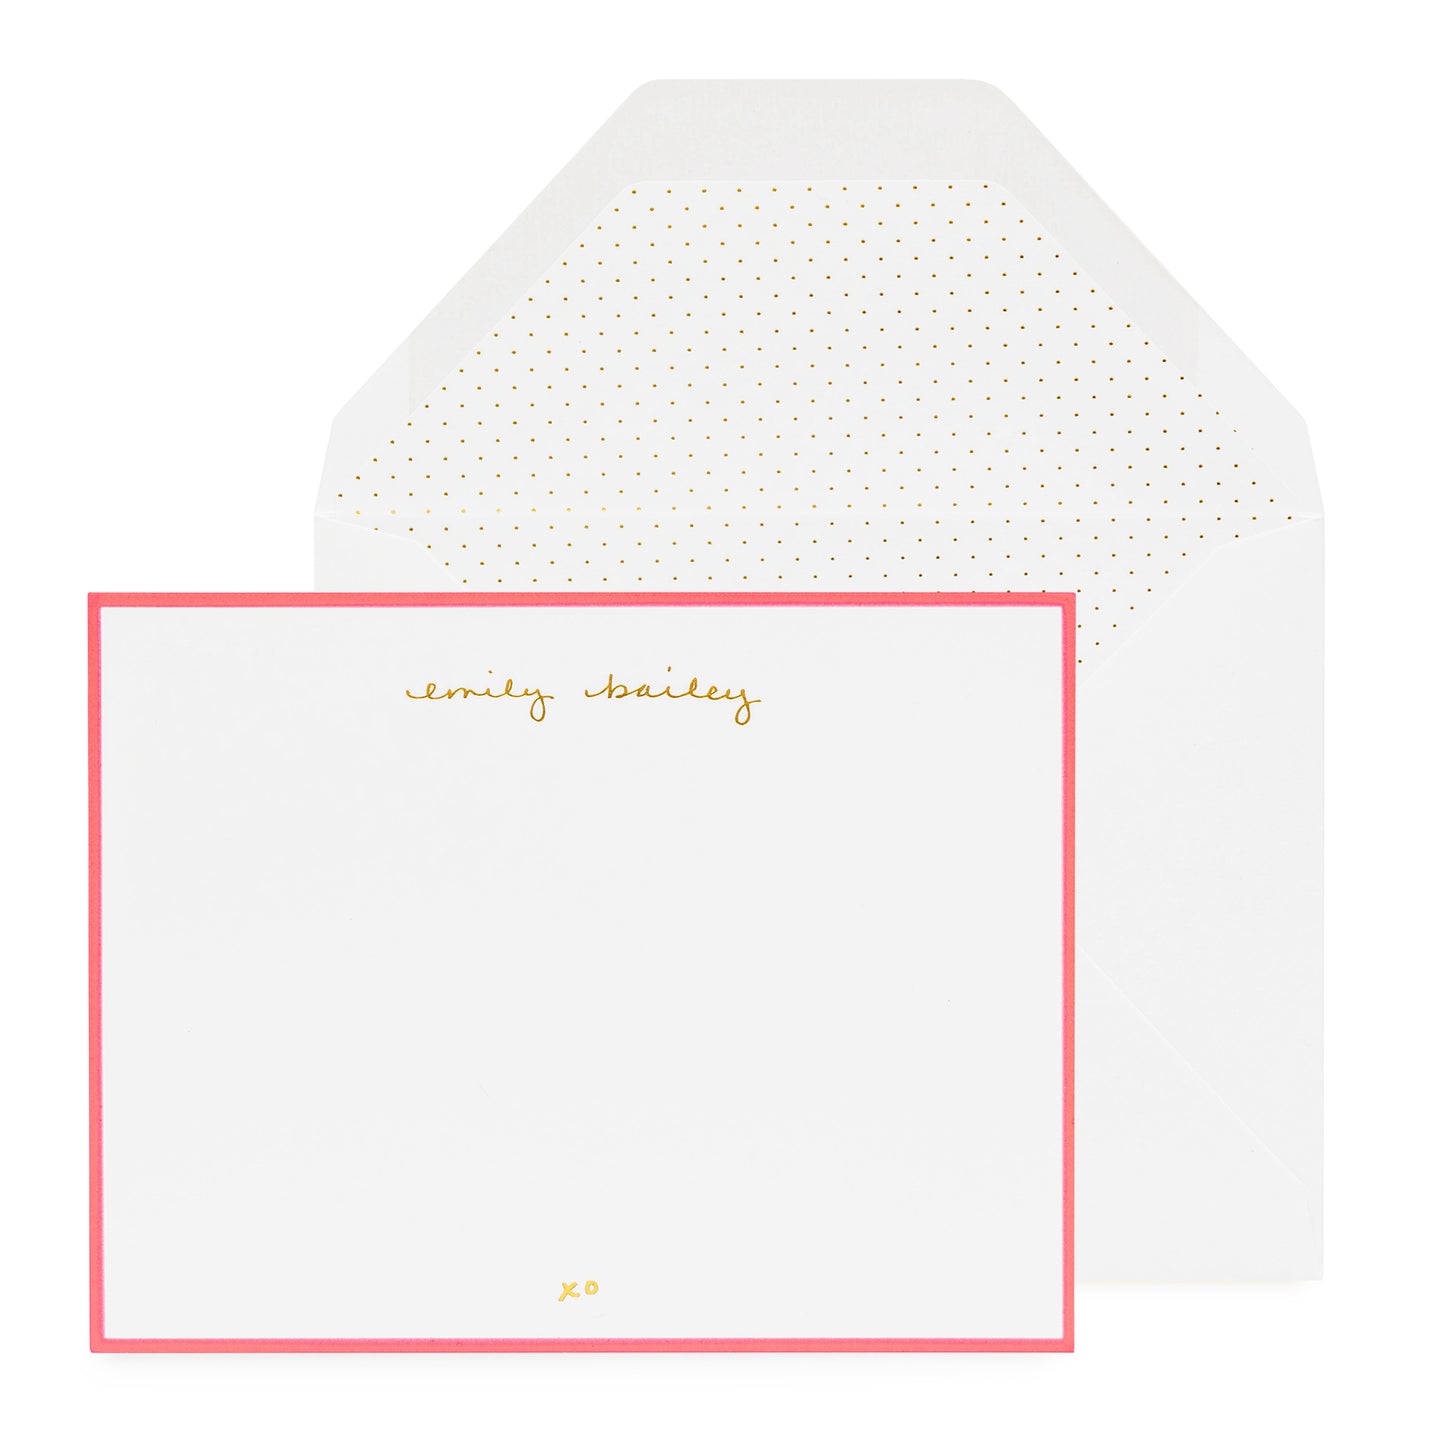 Personalized stationery with gold foil name and neon coral border